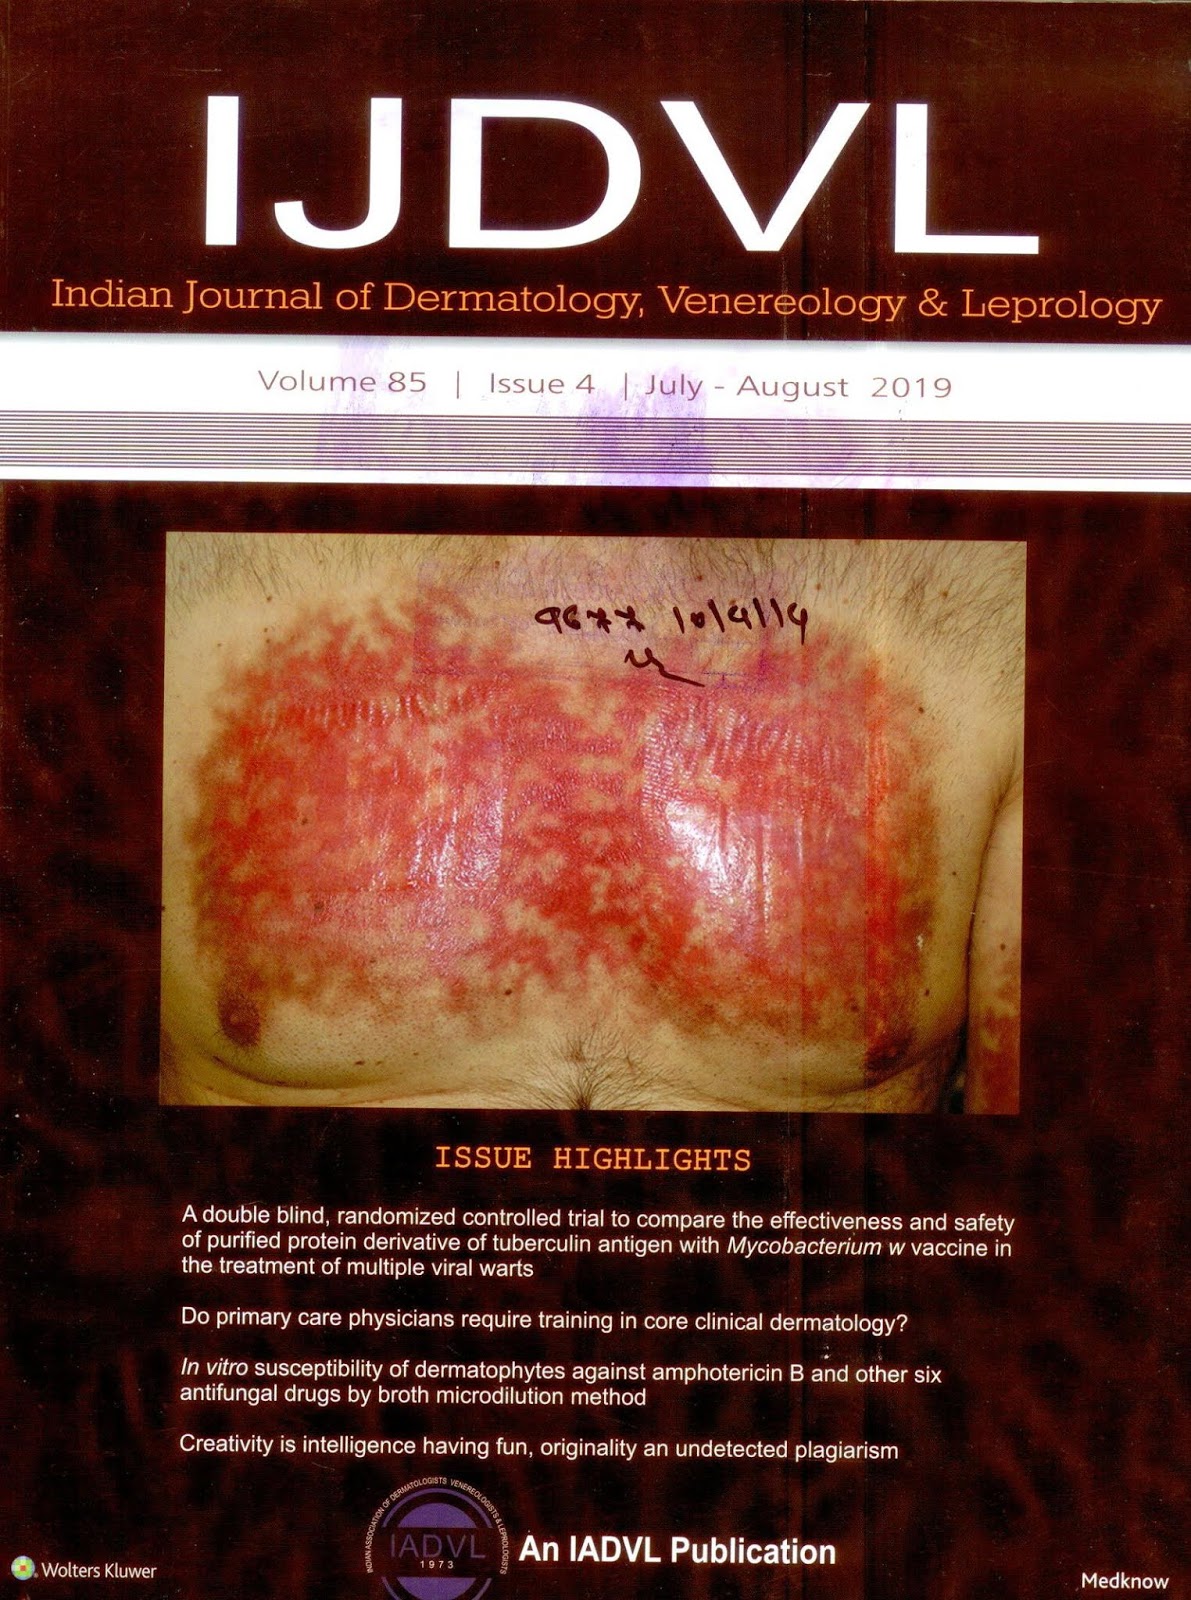 http://www.ijdvl.com/showBackIssue.asp?issn=0378-6323;year=2019;volume=85;issue=4;month=July-August